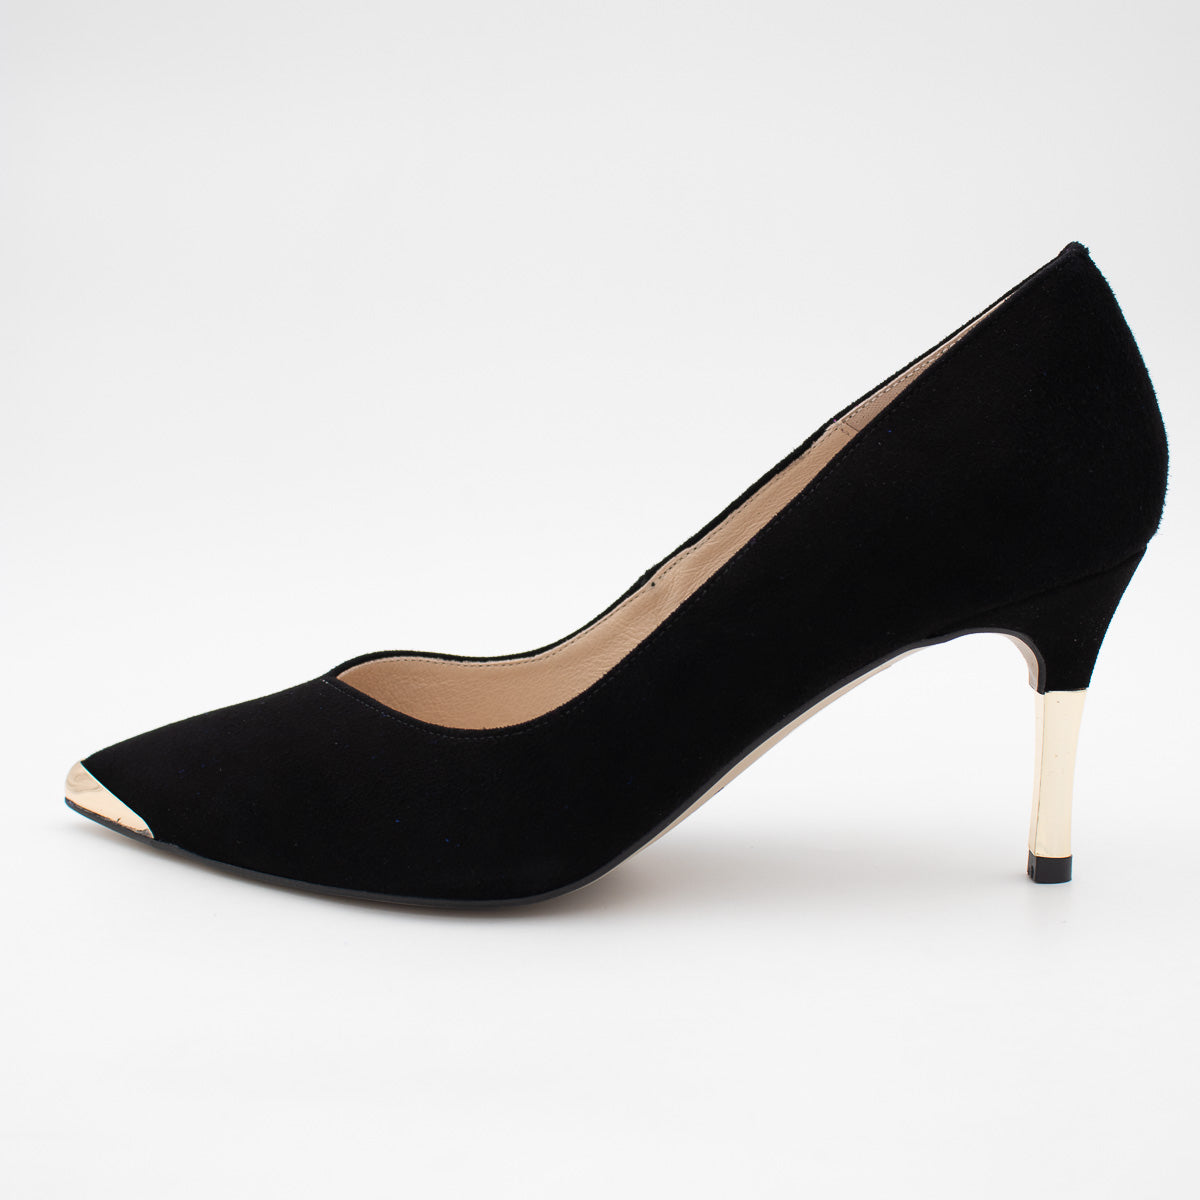 Sleek and Chic Black High Heels for Effortless Style